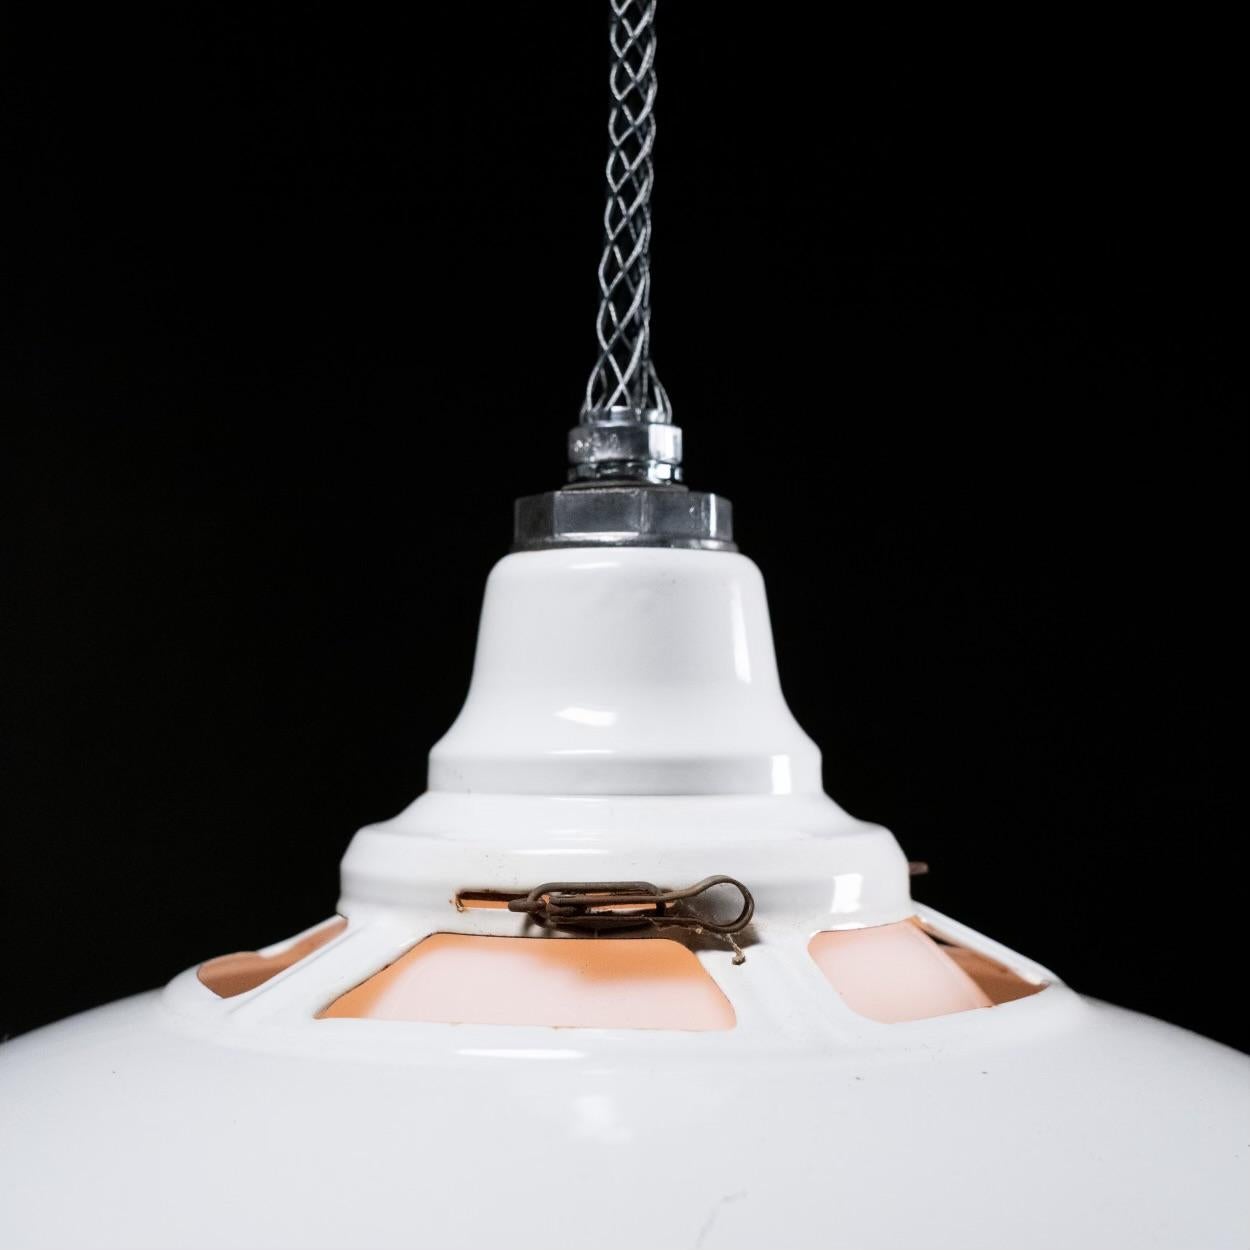 Machine Age 1940 Industrial Enamel Pendant Lights 8 Available For Sale